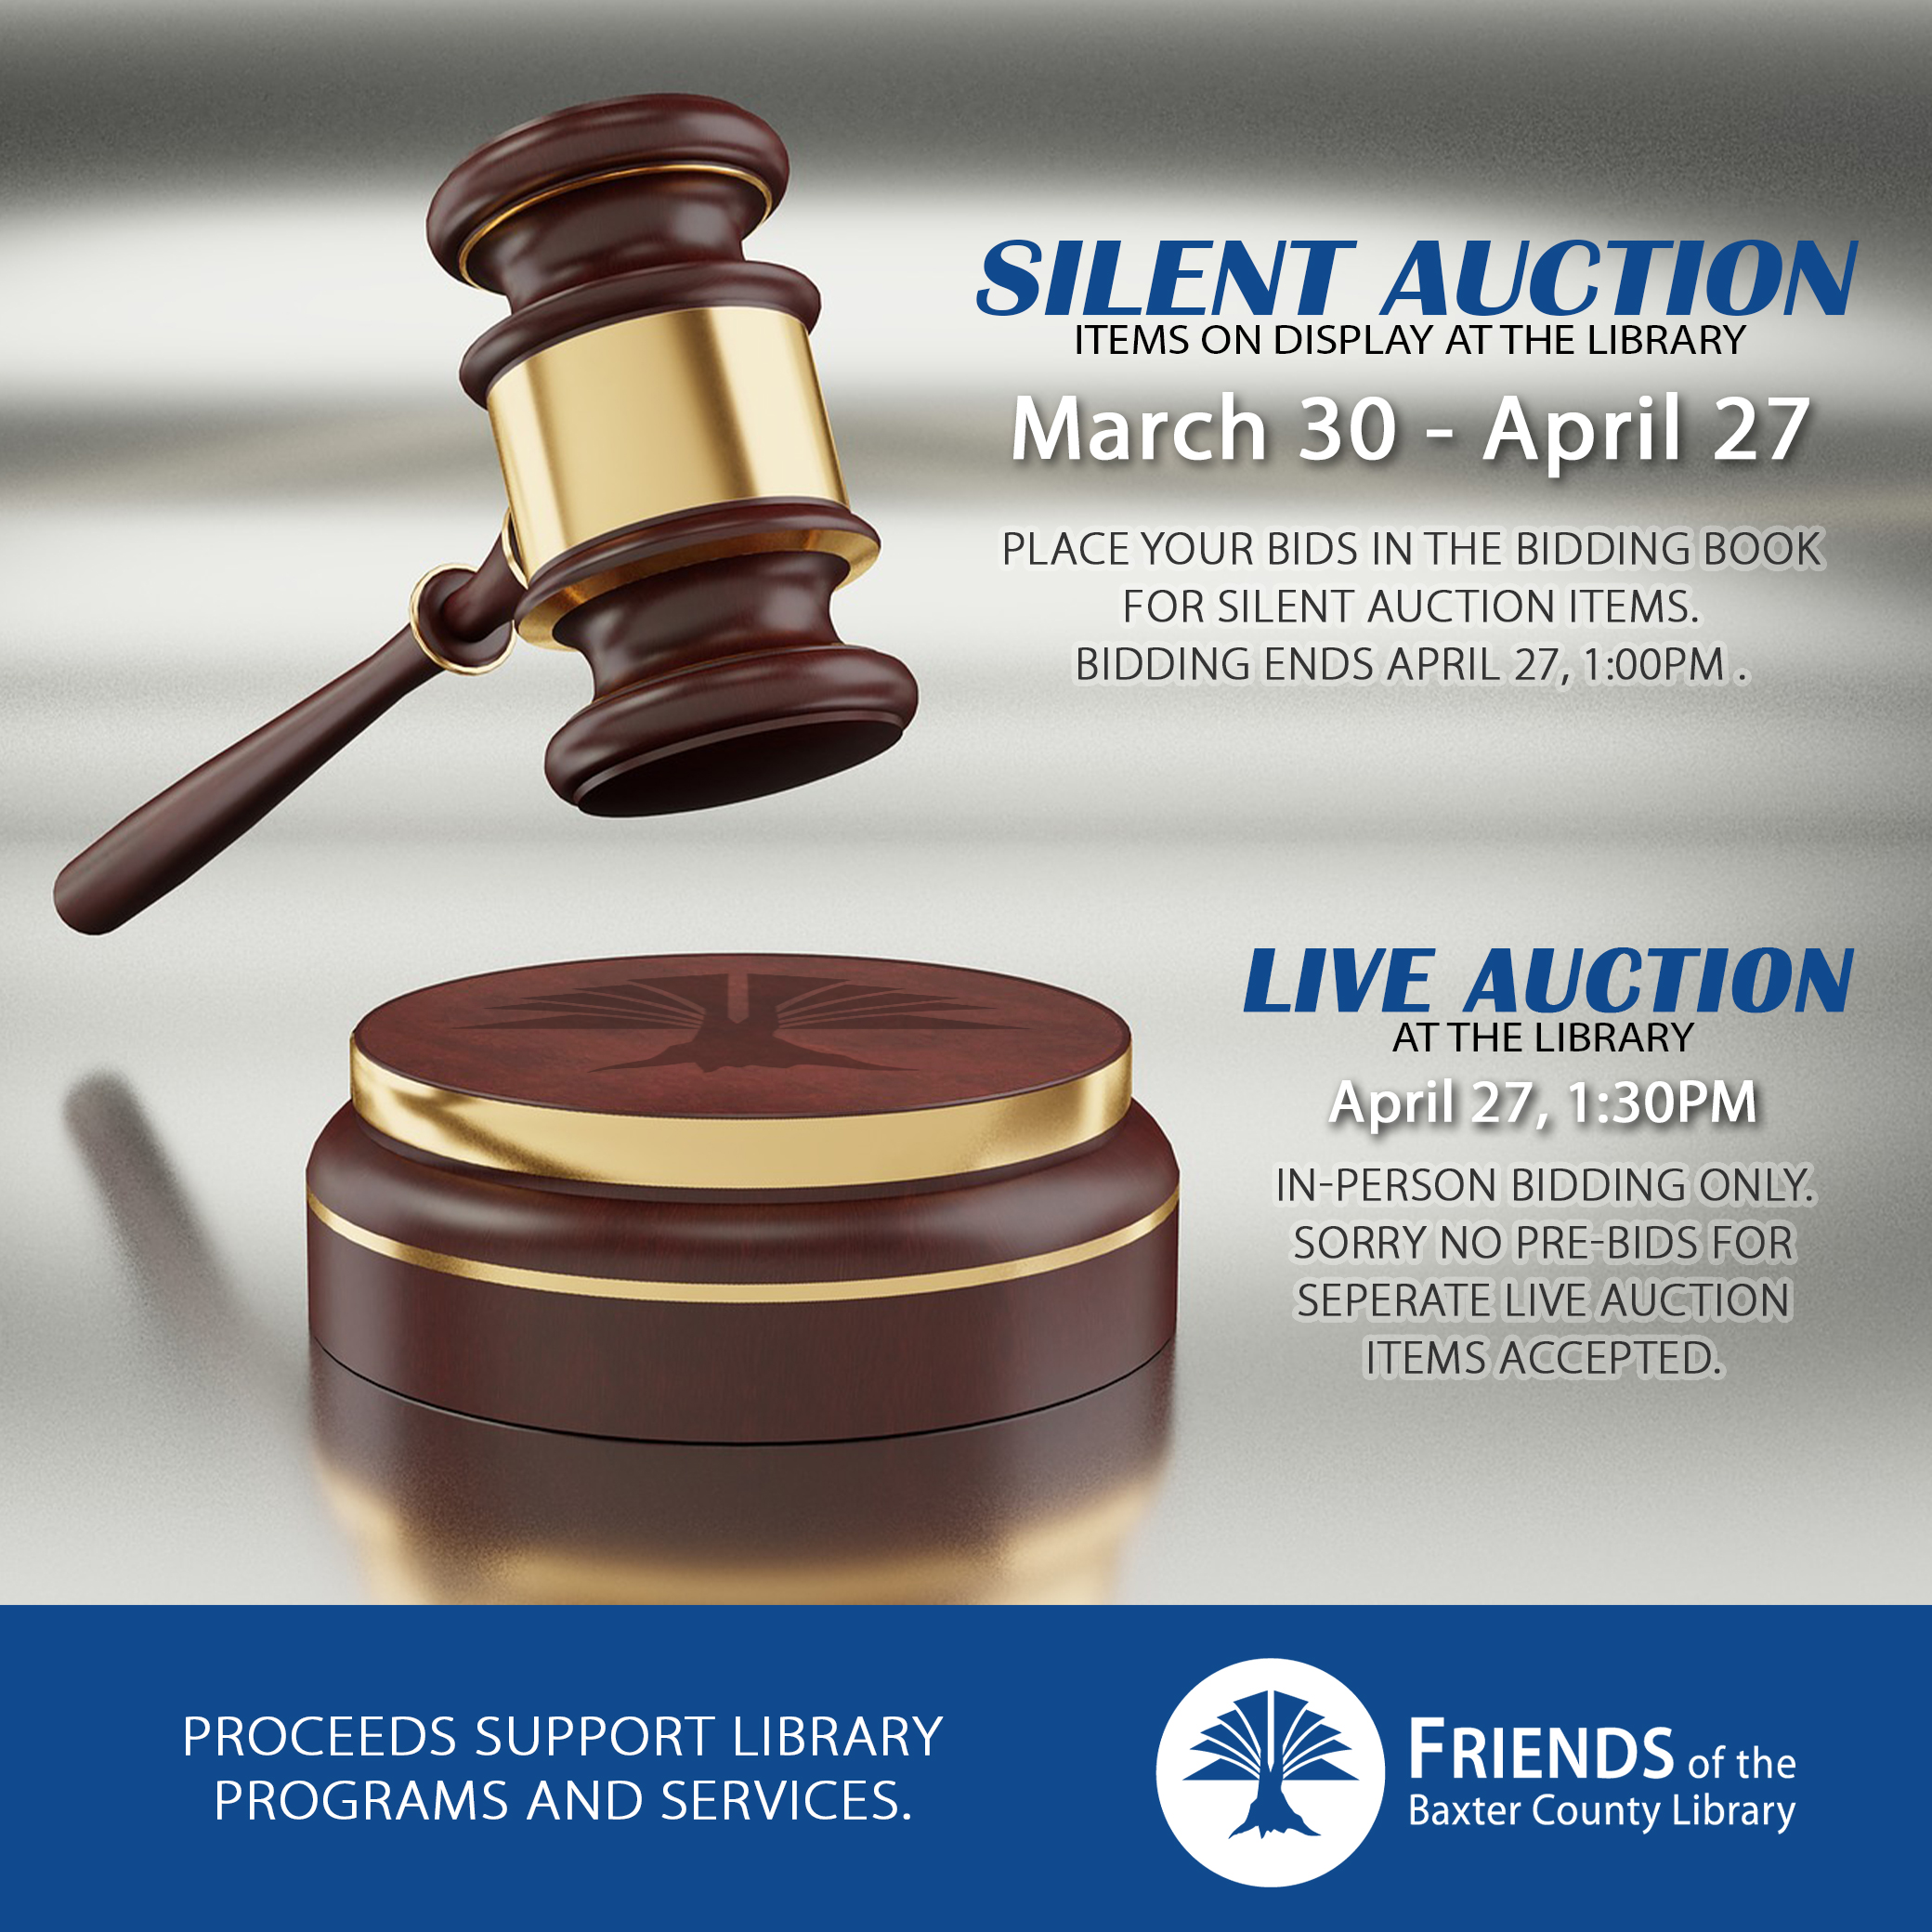 Silent auction ends today at 1pm. Live Auction begins at 1:30pm.